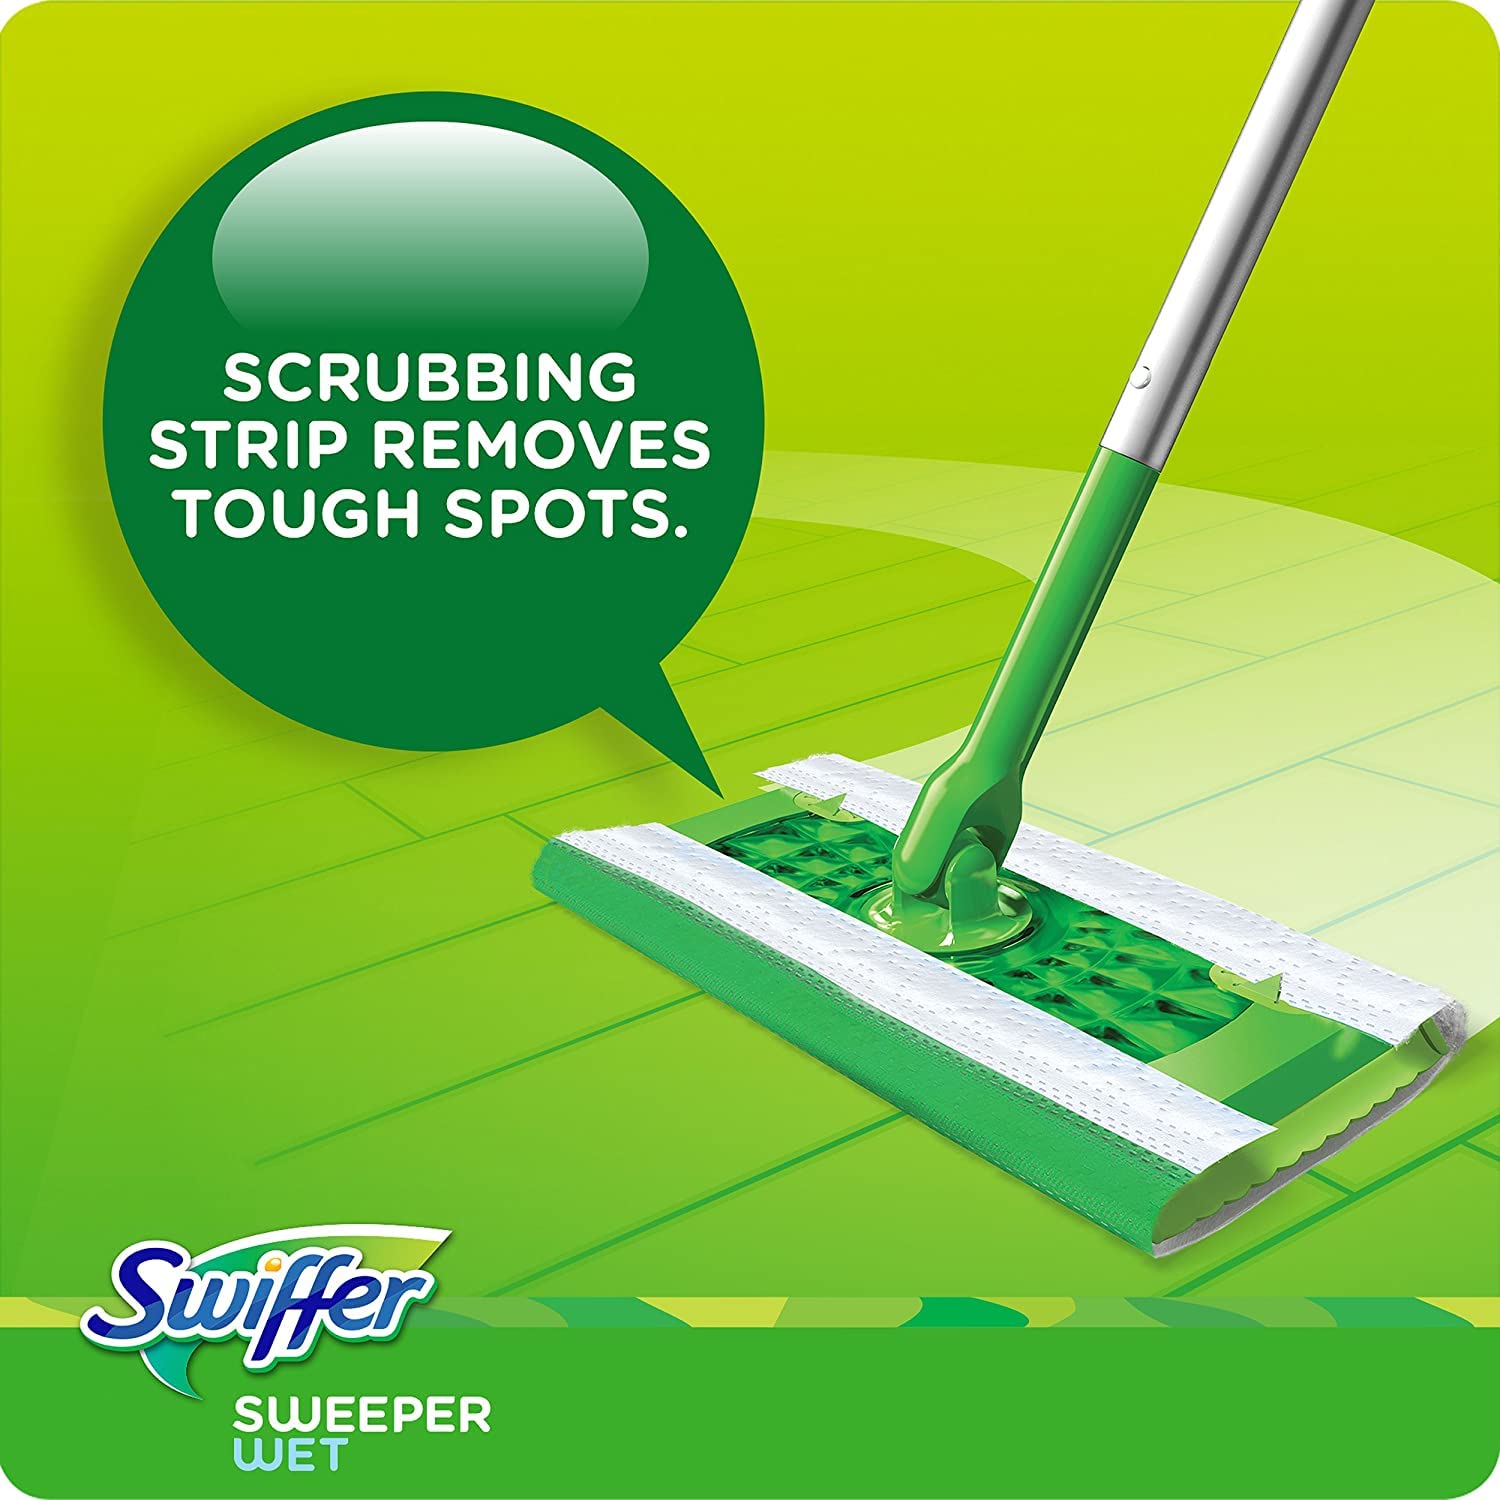 Swiffer Sweeper Wet Mopping Cloths, Multi-Surface Floor Cleaner with Gain Original Scent, 24 Count